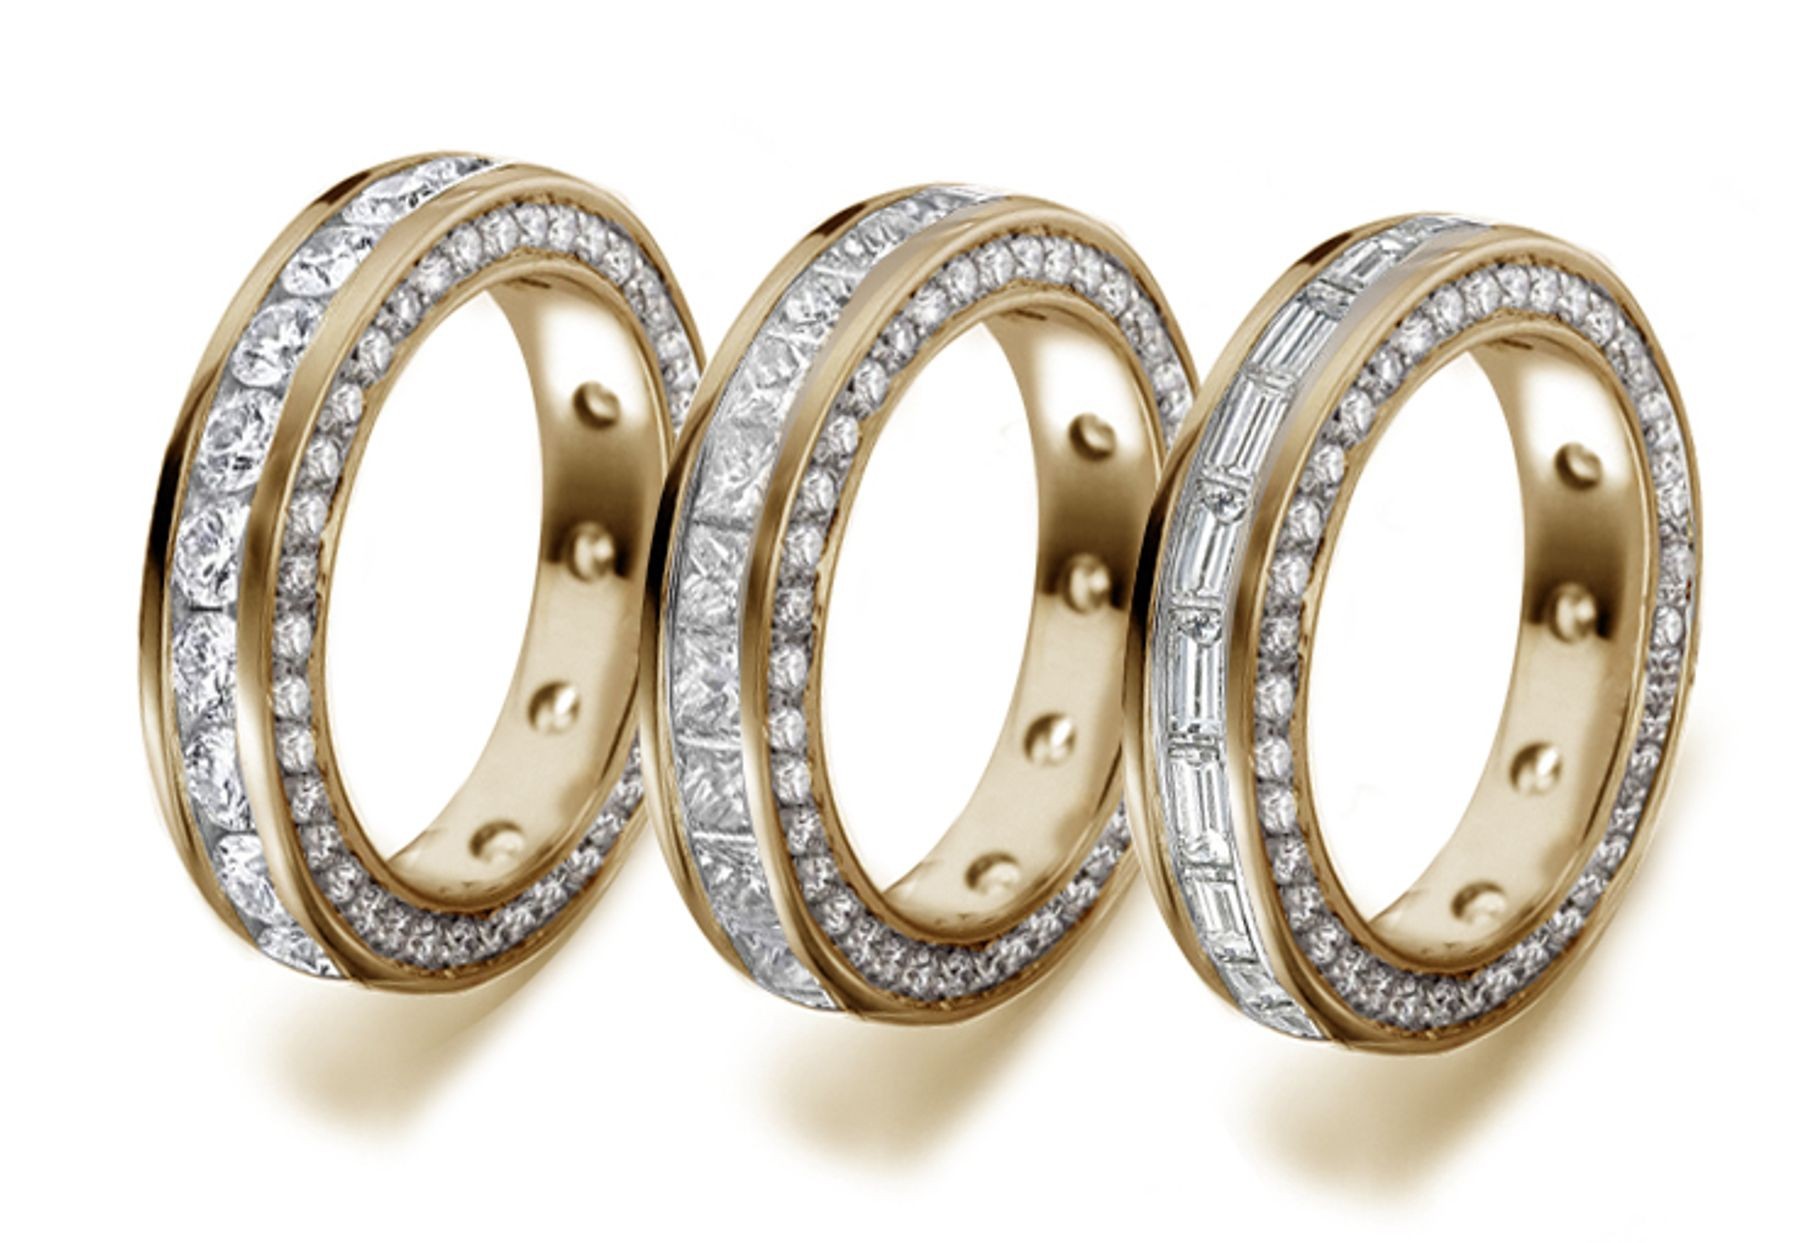 Twinkling & Shimmering: Yellow Gold Diamond Band Decorated with French Cut Diamonds on Sides in Gold